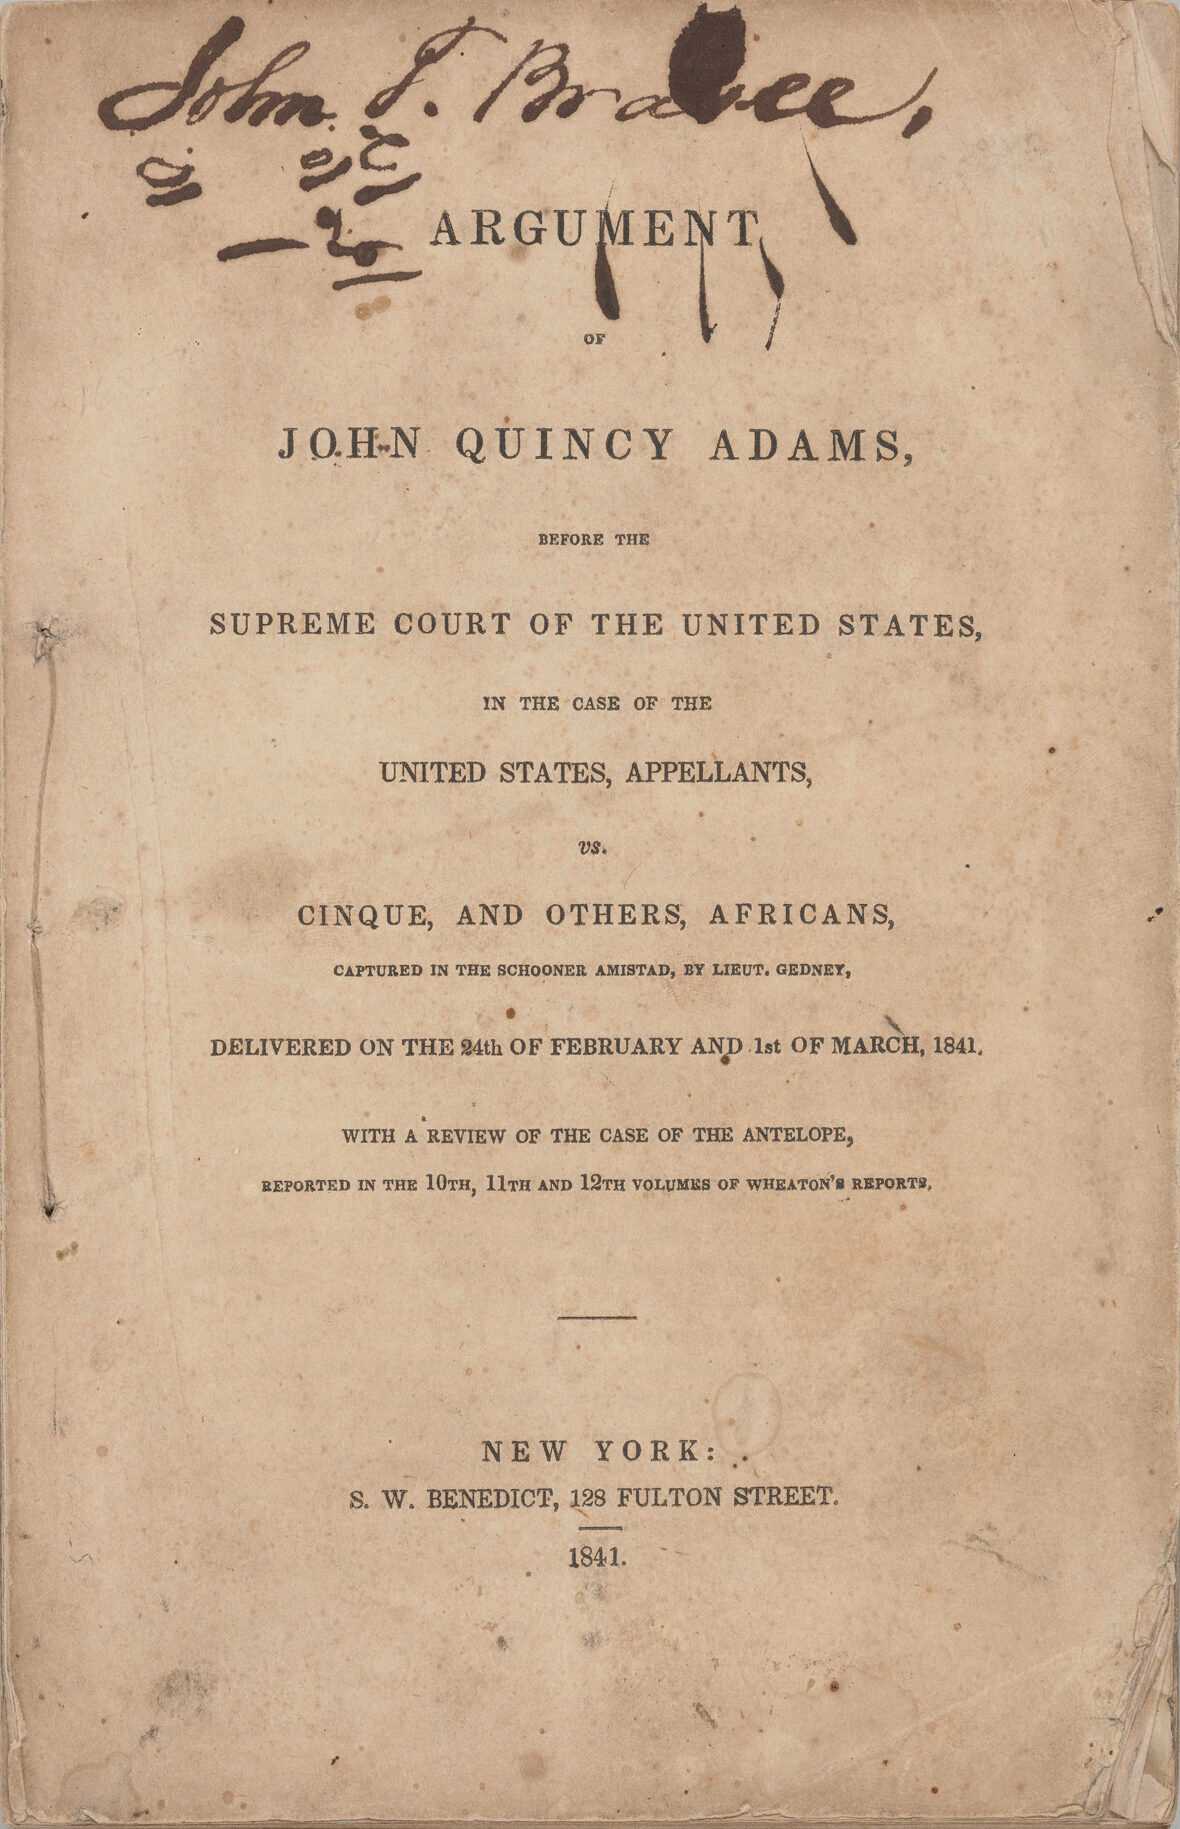 Argument of John Quincy Adams, before the Supreme Court of the United States, in the case of the United States, Appellants, vs. Cinque, and others, Africans, captured in the Schooner Amistad